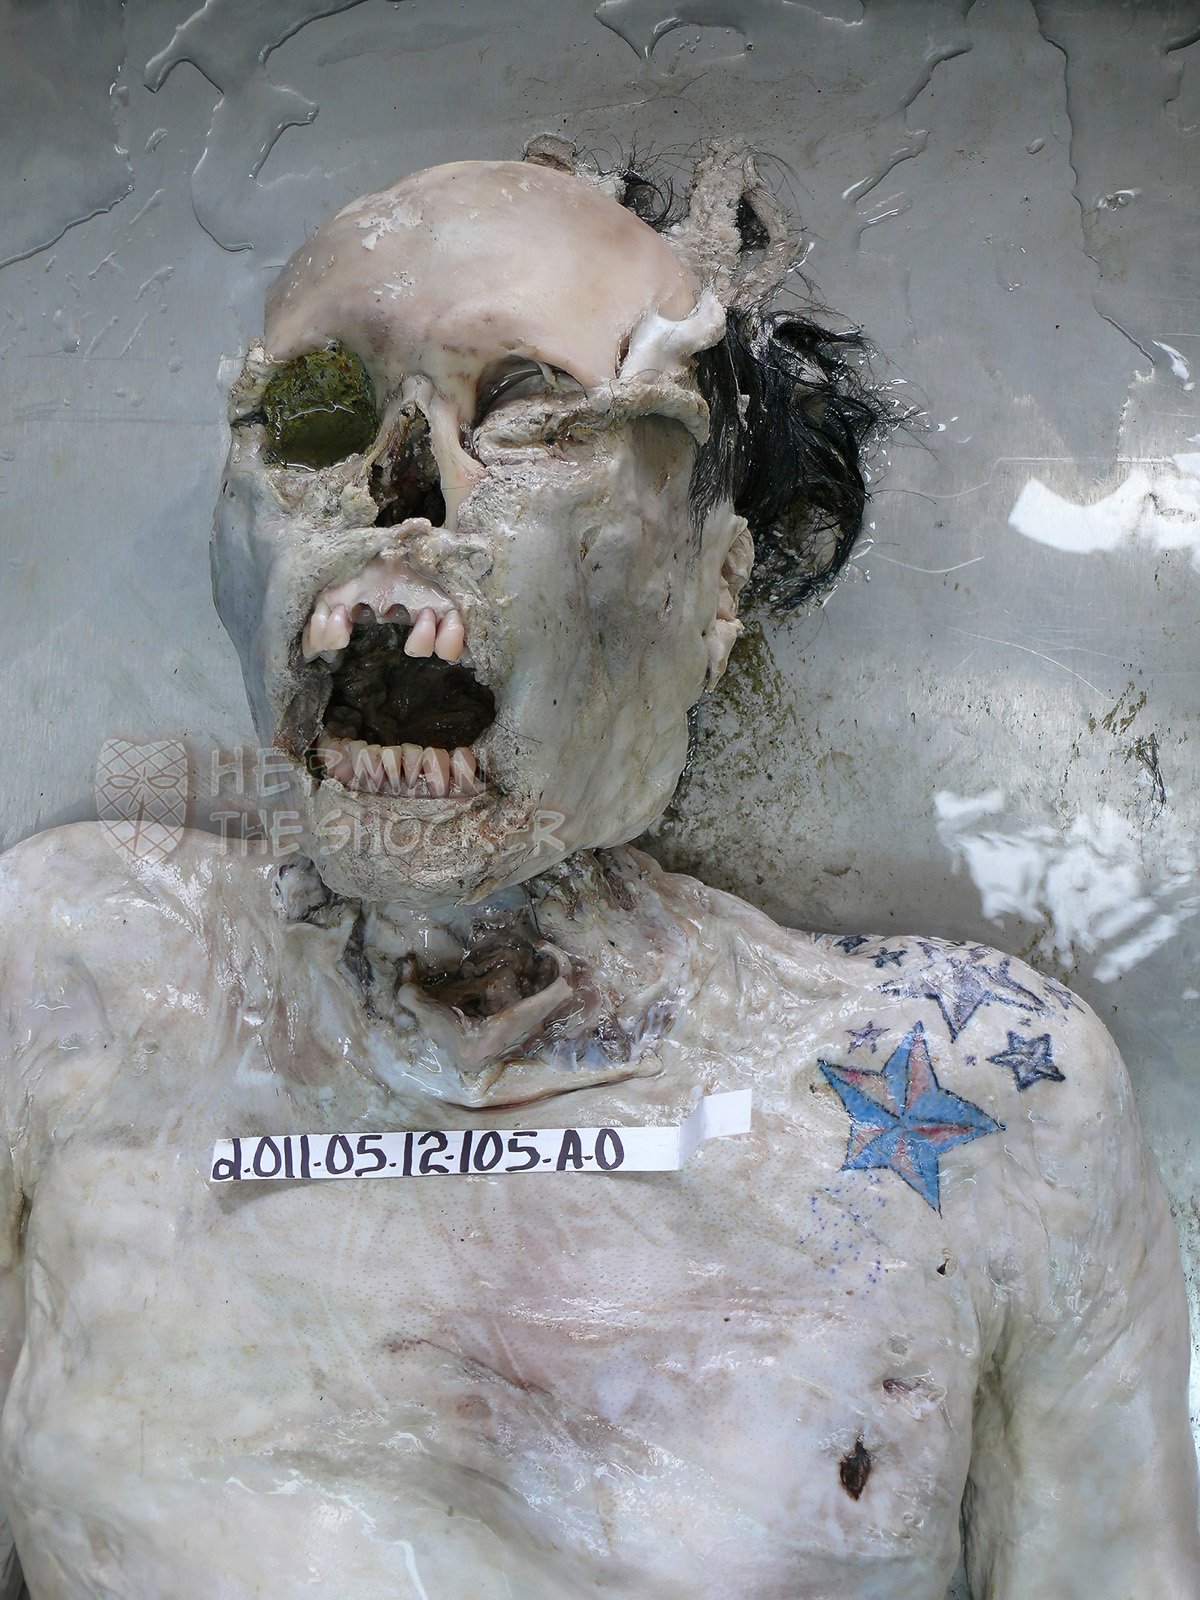 This individual was found in a state of decomposition inside plastic bags buried in soil